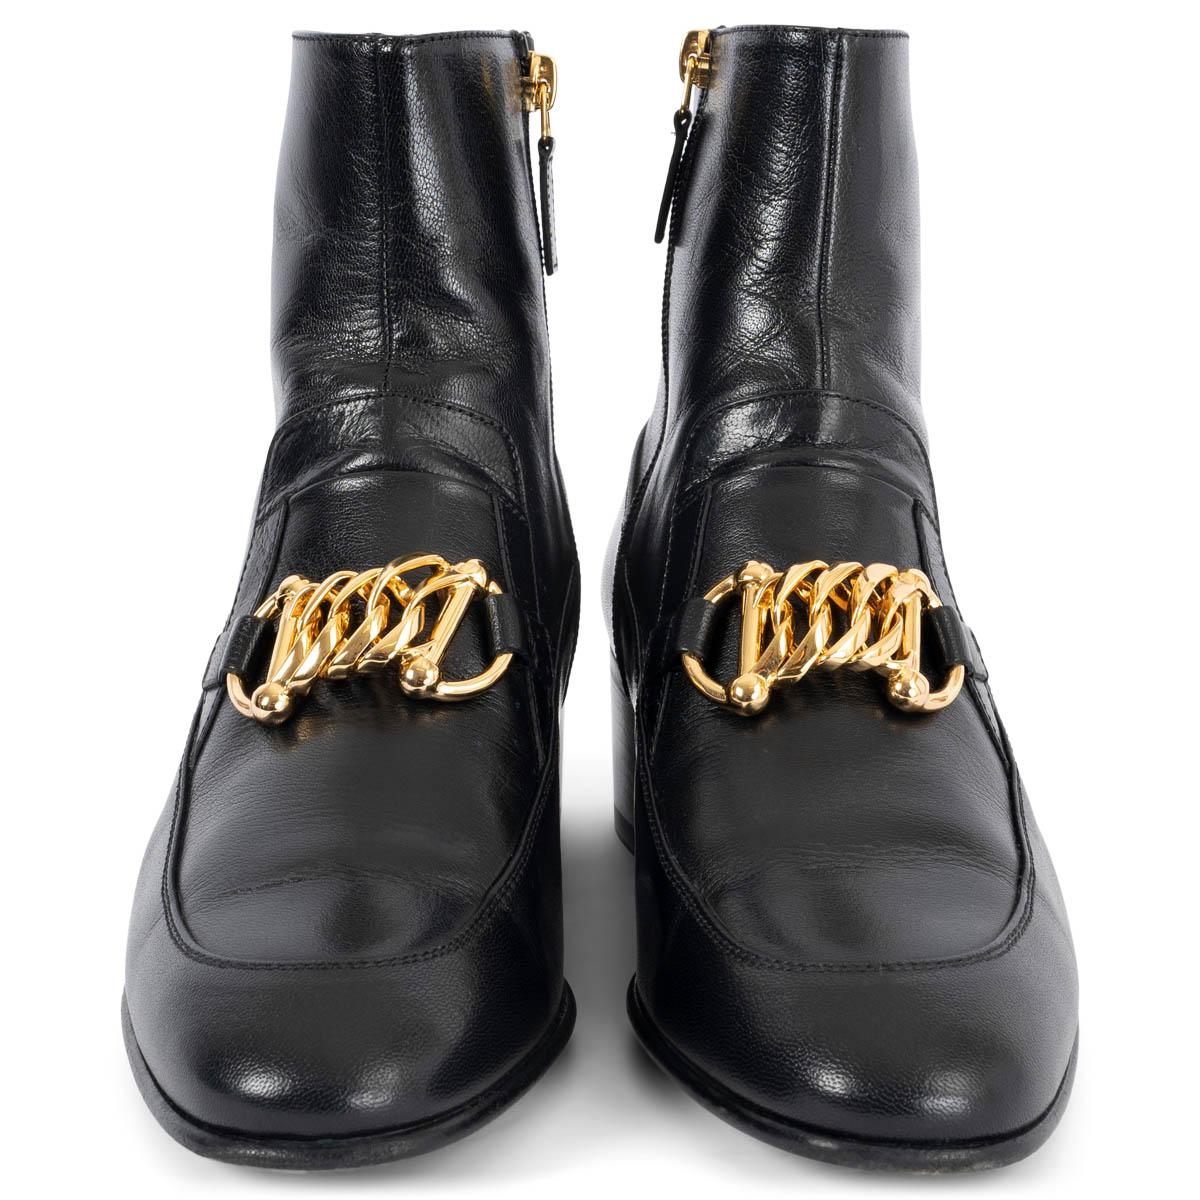 100% authentic Gucci Kitten ankle-boots in black leather embellished with chain horsebit in gold-tone metal and studded heel. Have been worn and are in excellent condition.

Measurements
Imprinted Size	38
Shoe Size	38
Inside Sole	25cm